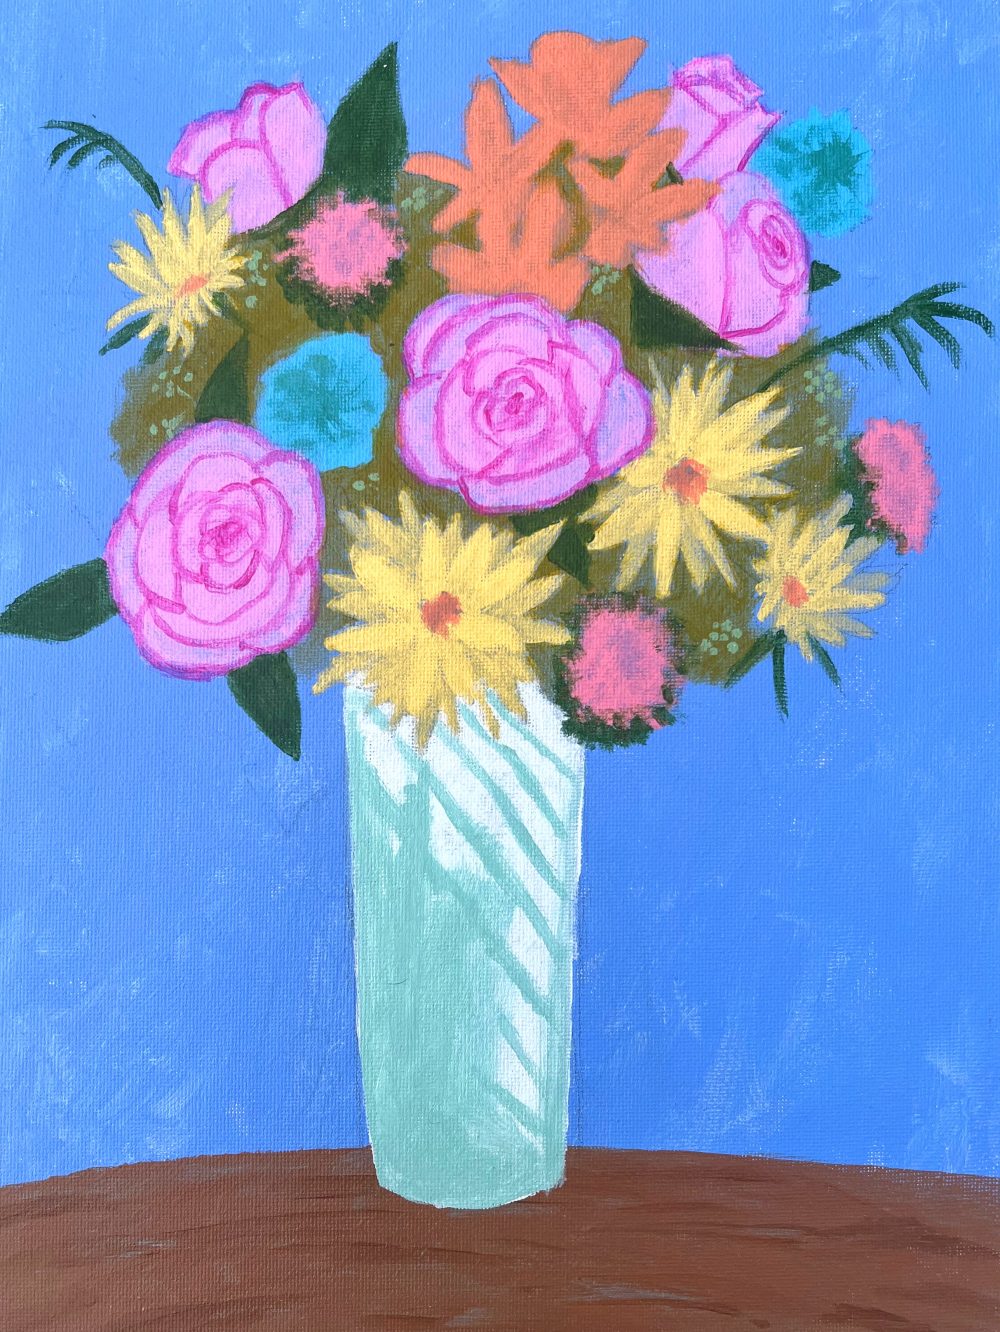 A painting of a bouquet of flowers with a mint blue stained vase on top a rounded wood table with a light blue wall behind it.